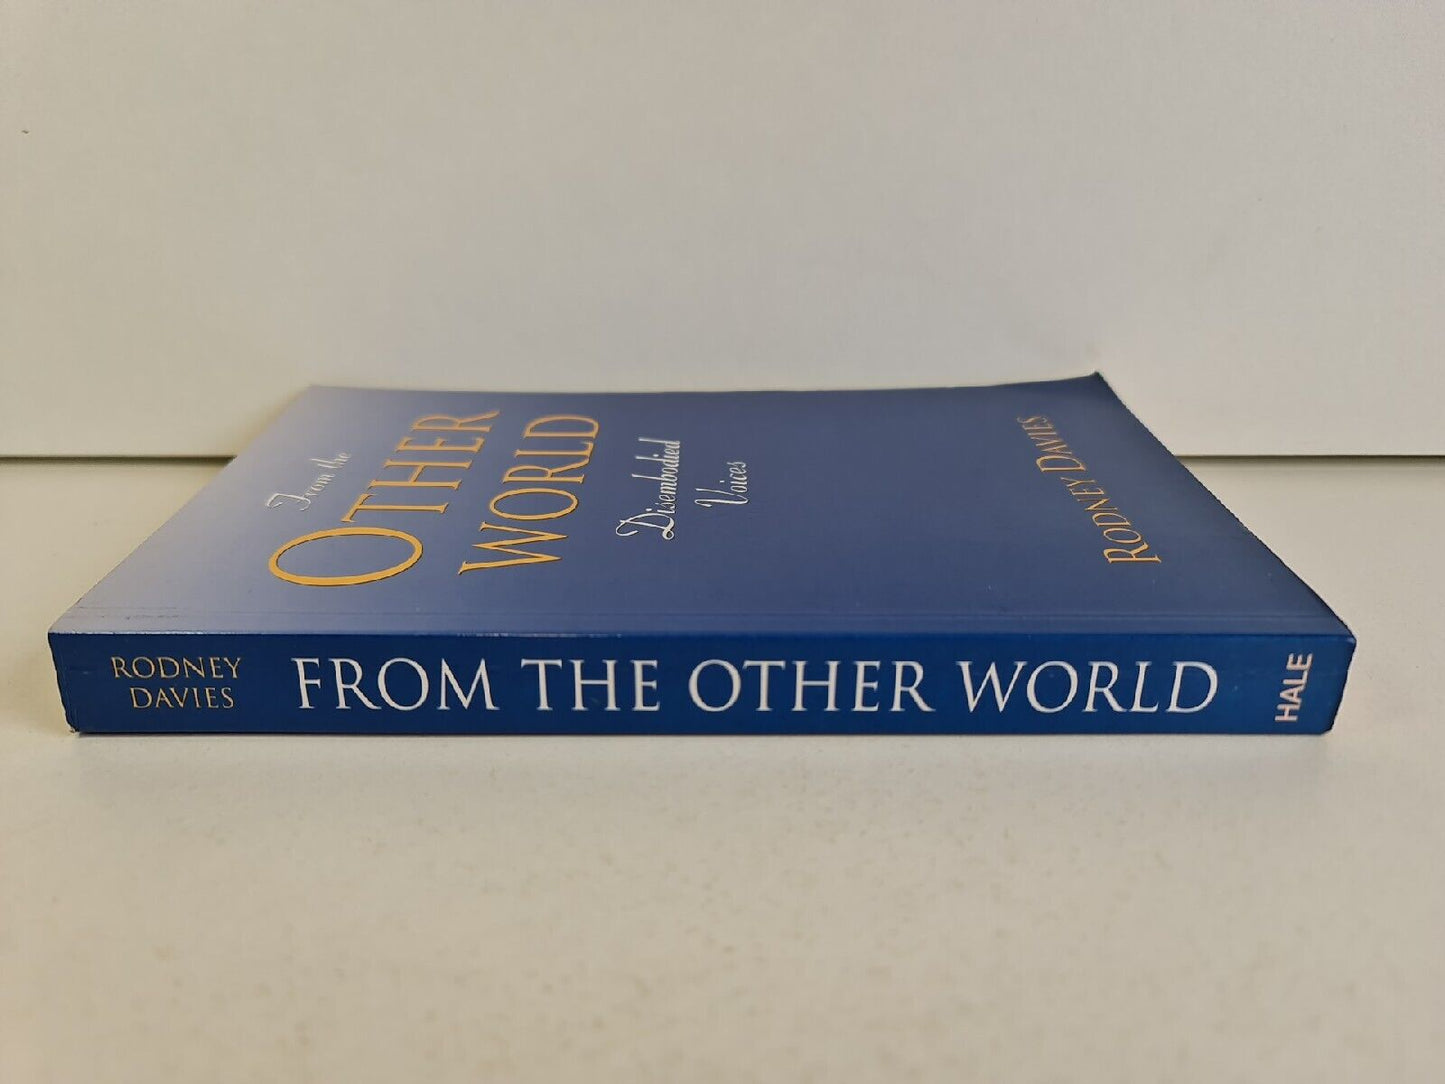 From the Other World: Disembodied Voices by Rodney Davies (2005)